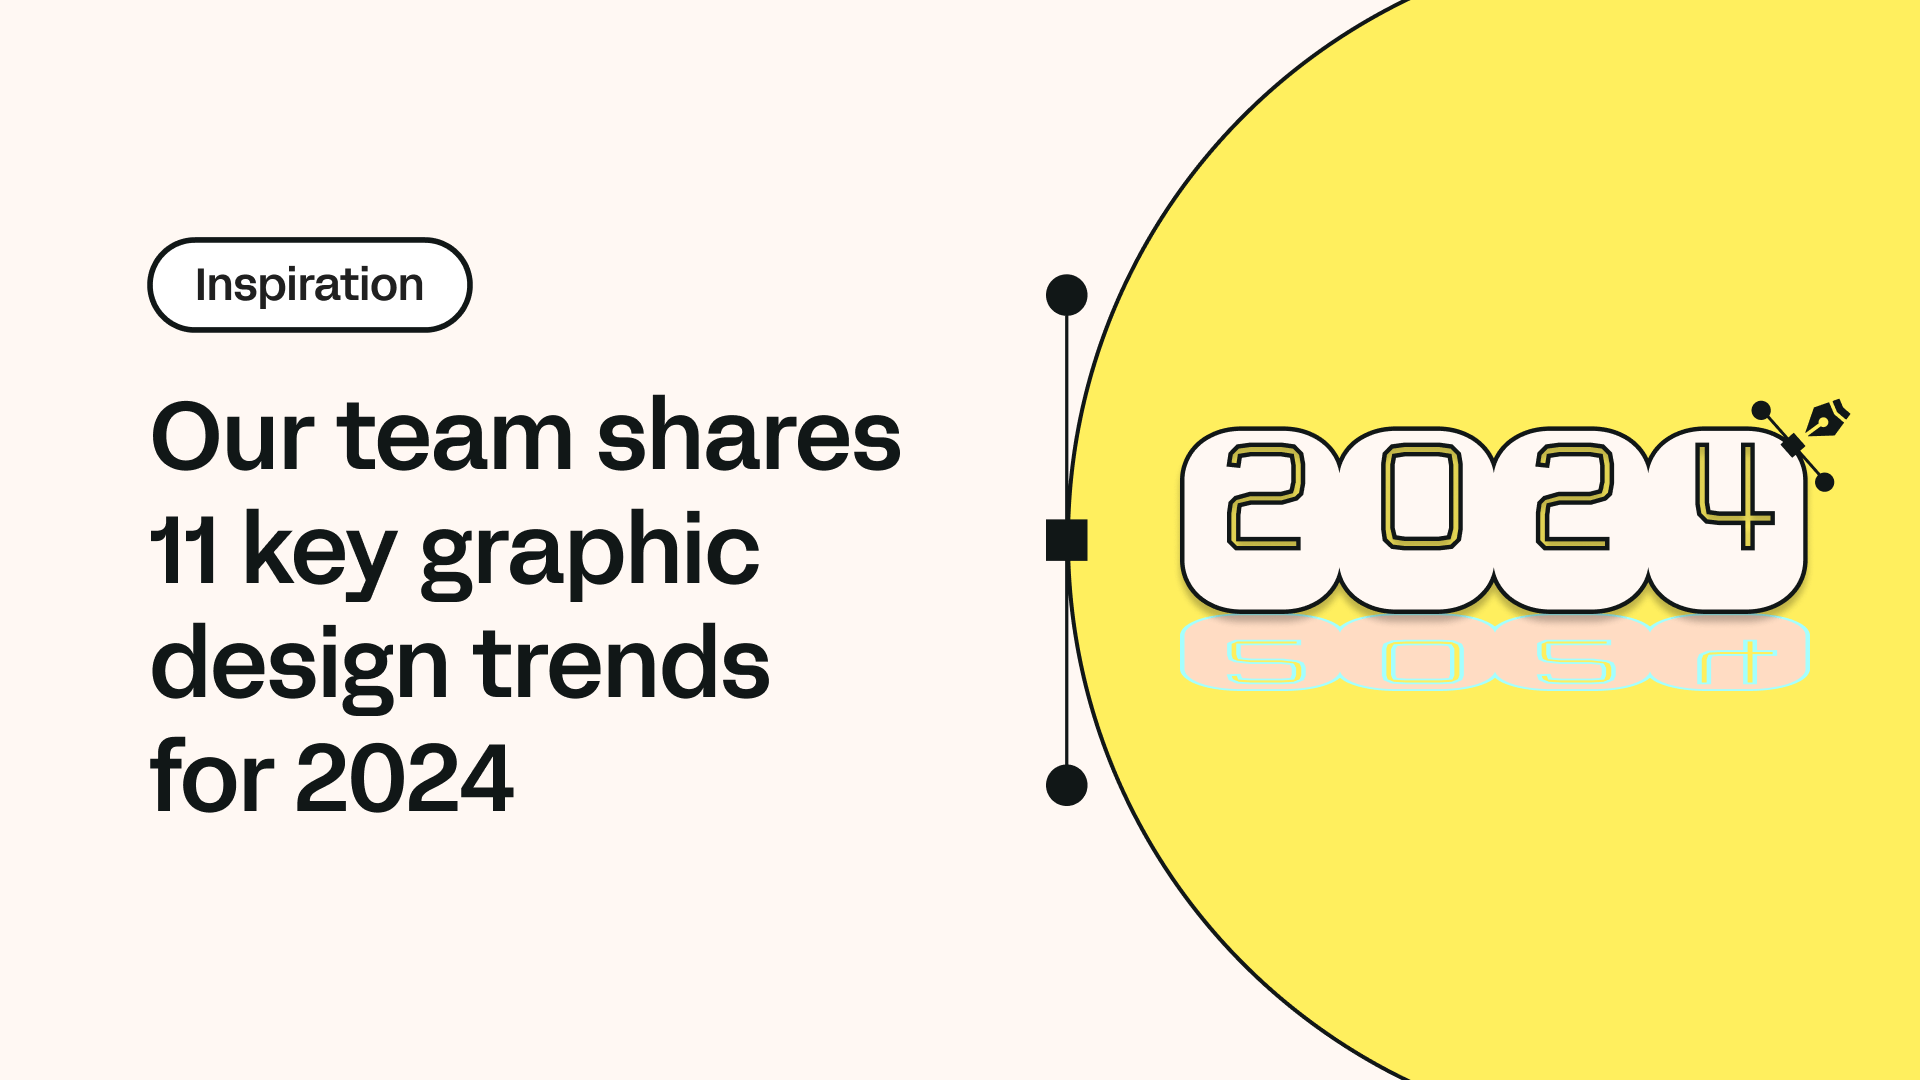 Our team shares 11 key graphic design trends for 2024 | Linearity